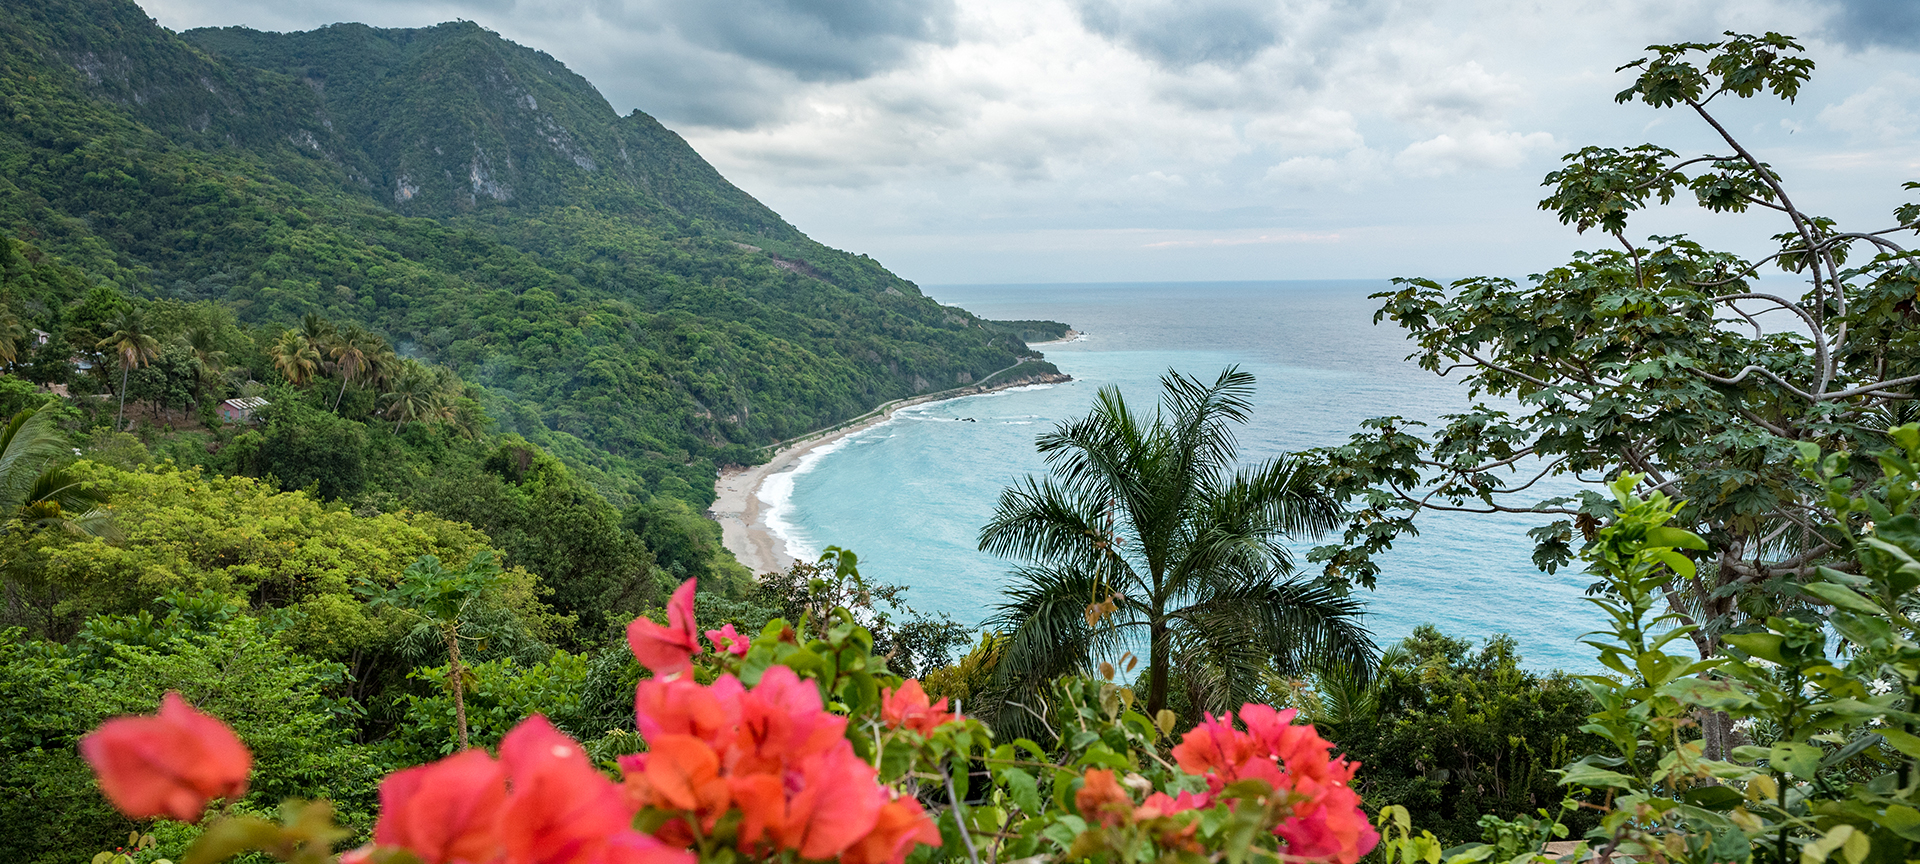 A beautiful view of lush green mountains meeting a sandy beach and bright blue waters